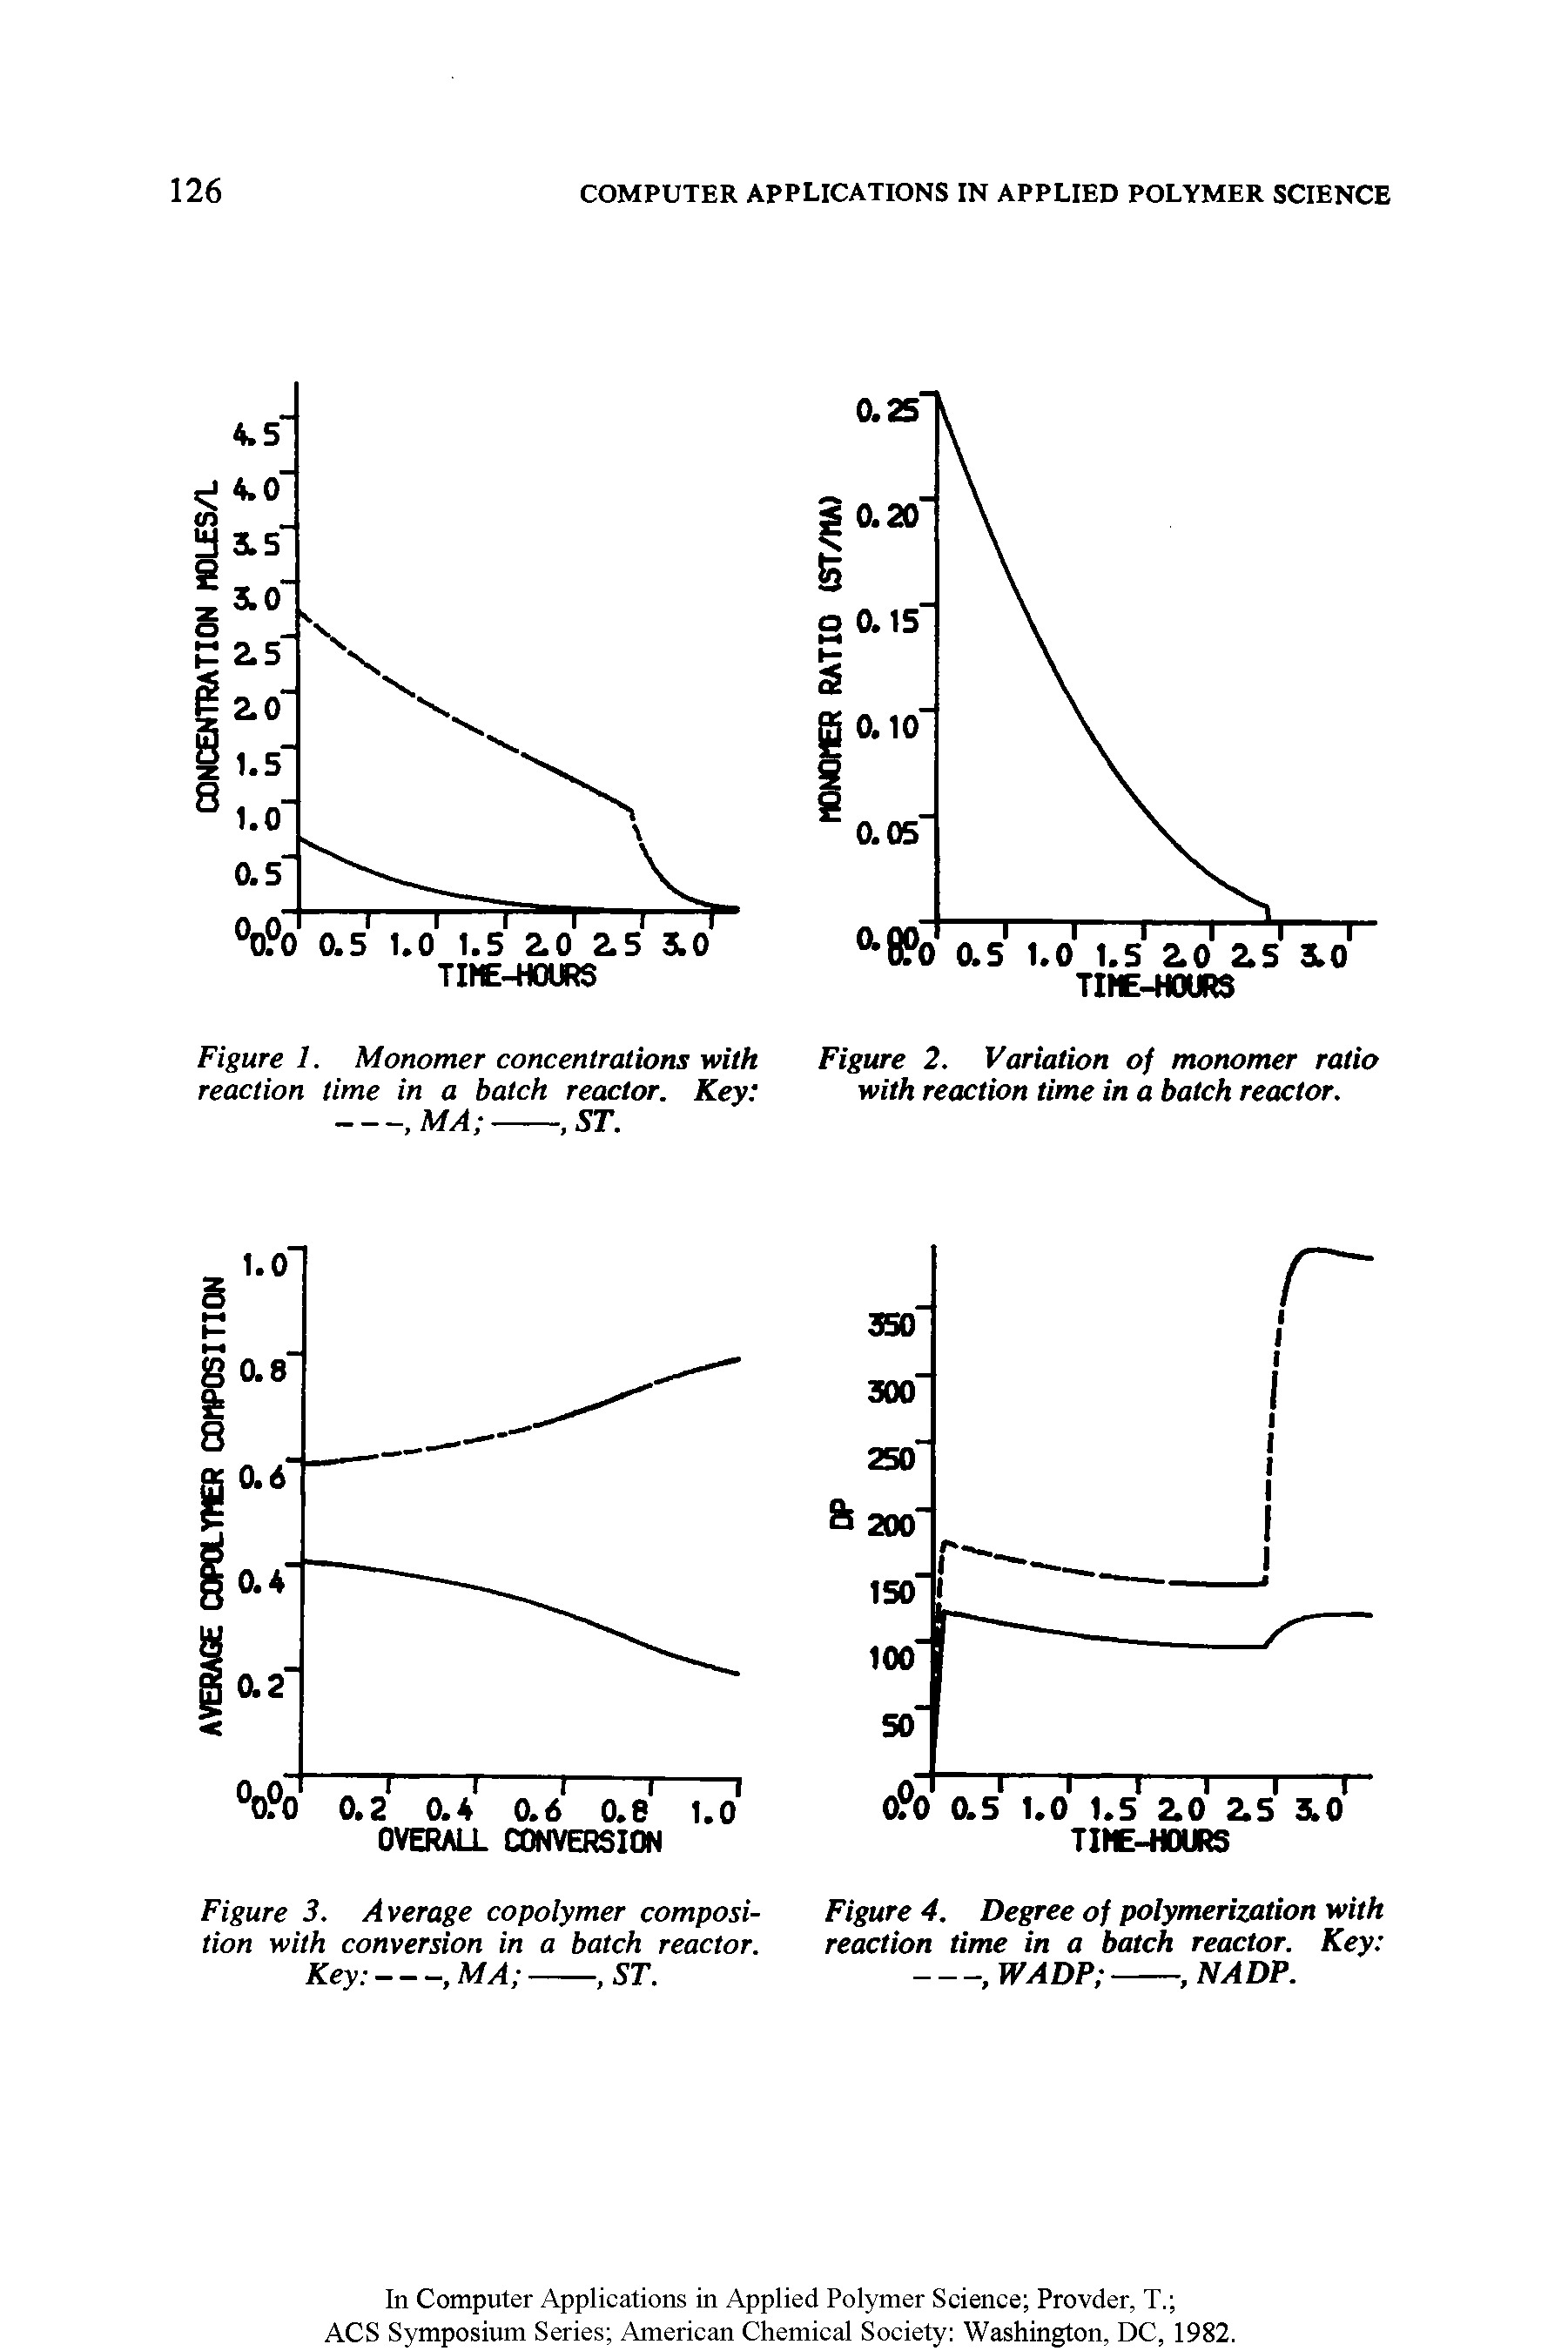 Figure 3. Average copolymer composition with conversion in a batch reactor. Key -------------,MA -------, ST.